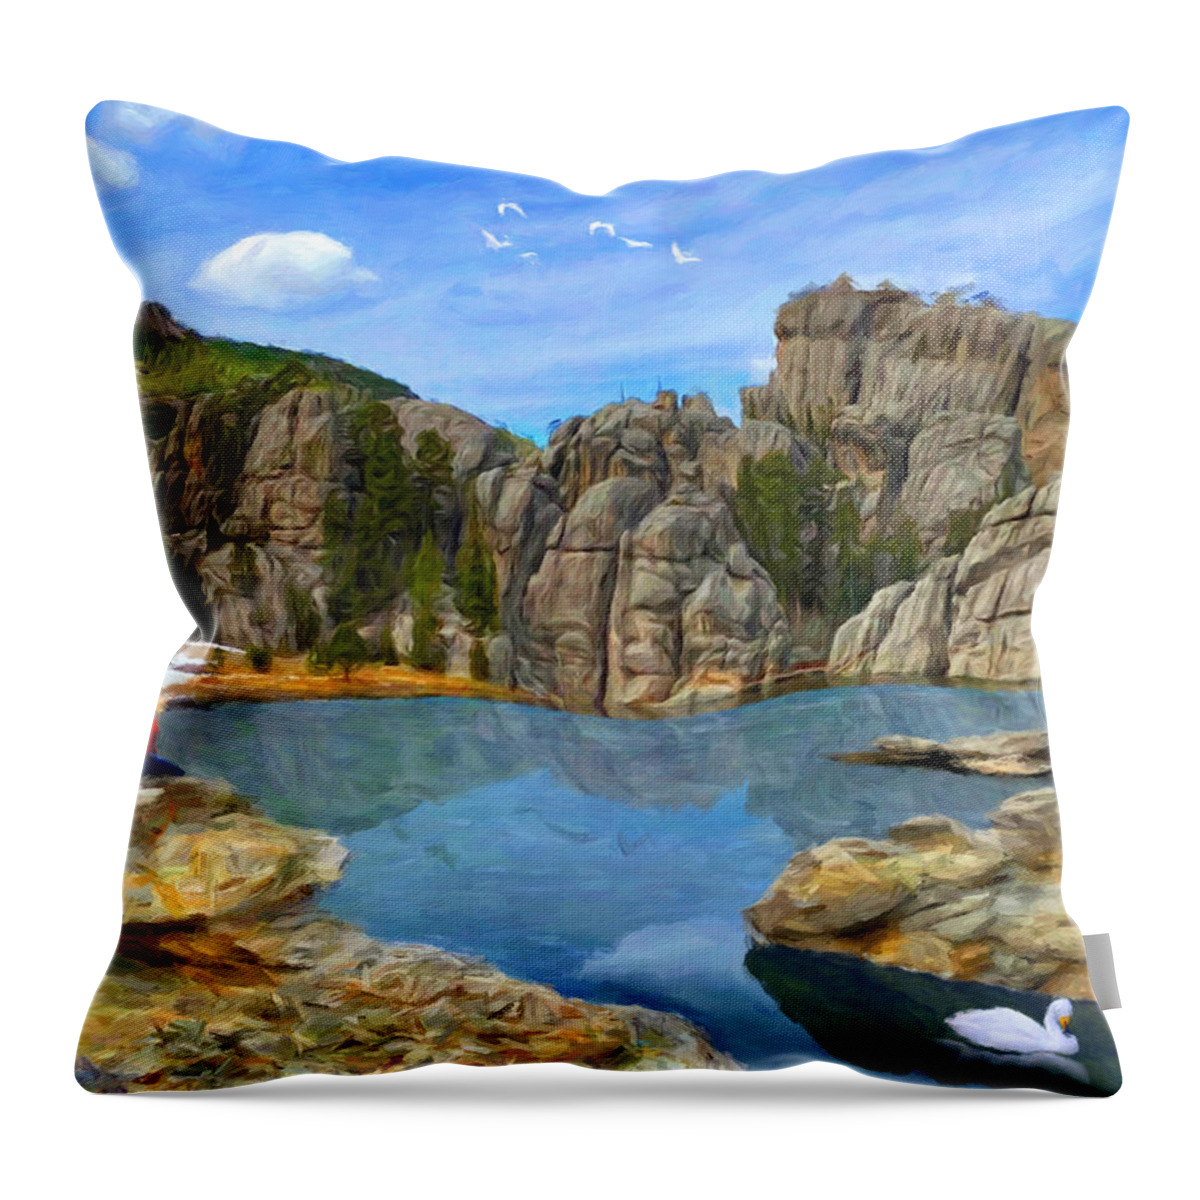  Landscape Throw Pillow featuring the painting Black Hills, South Dakota by Trask Ferrero